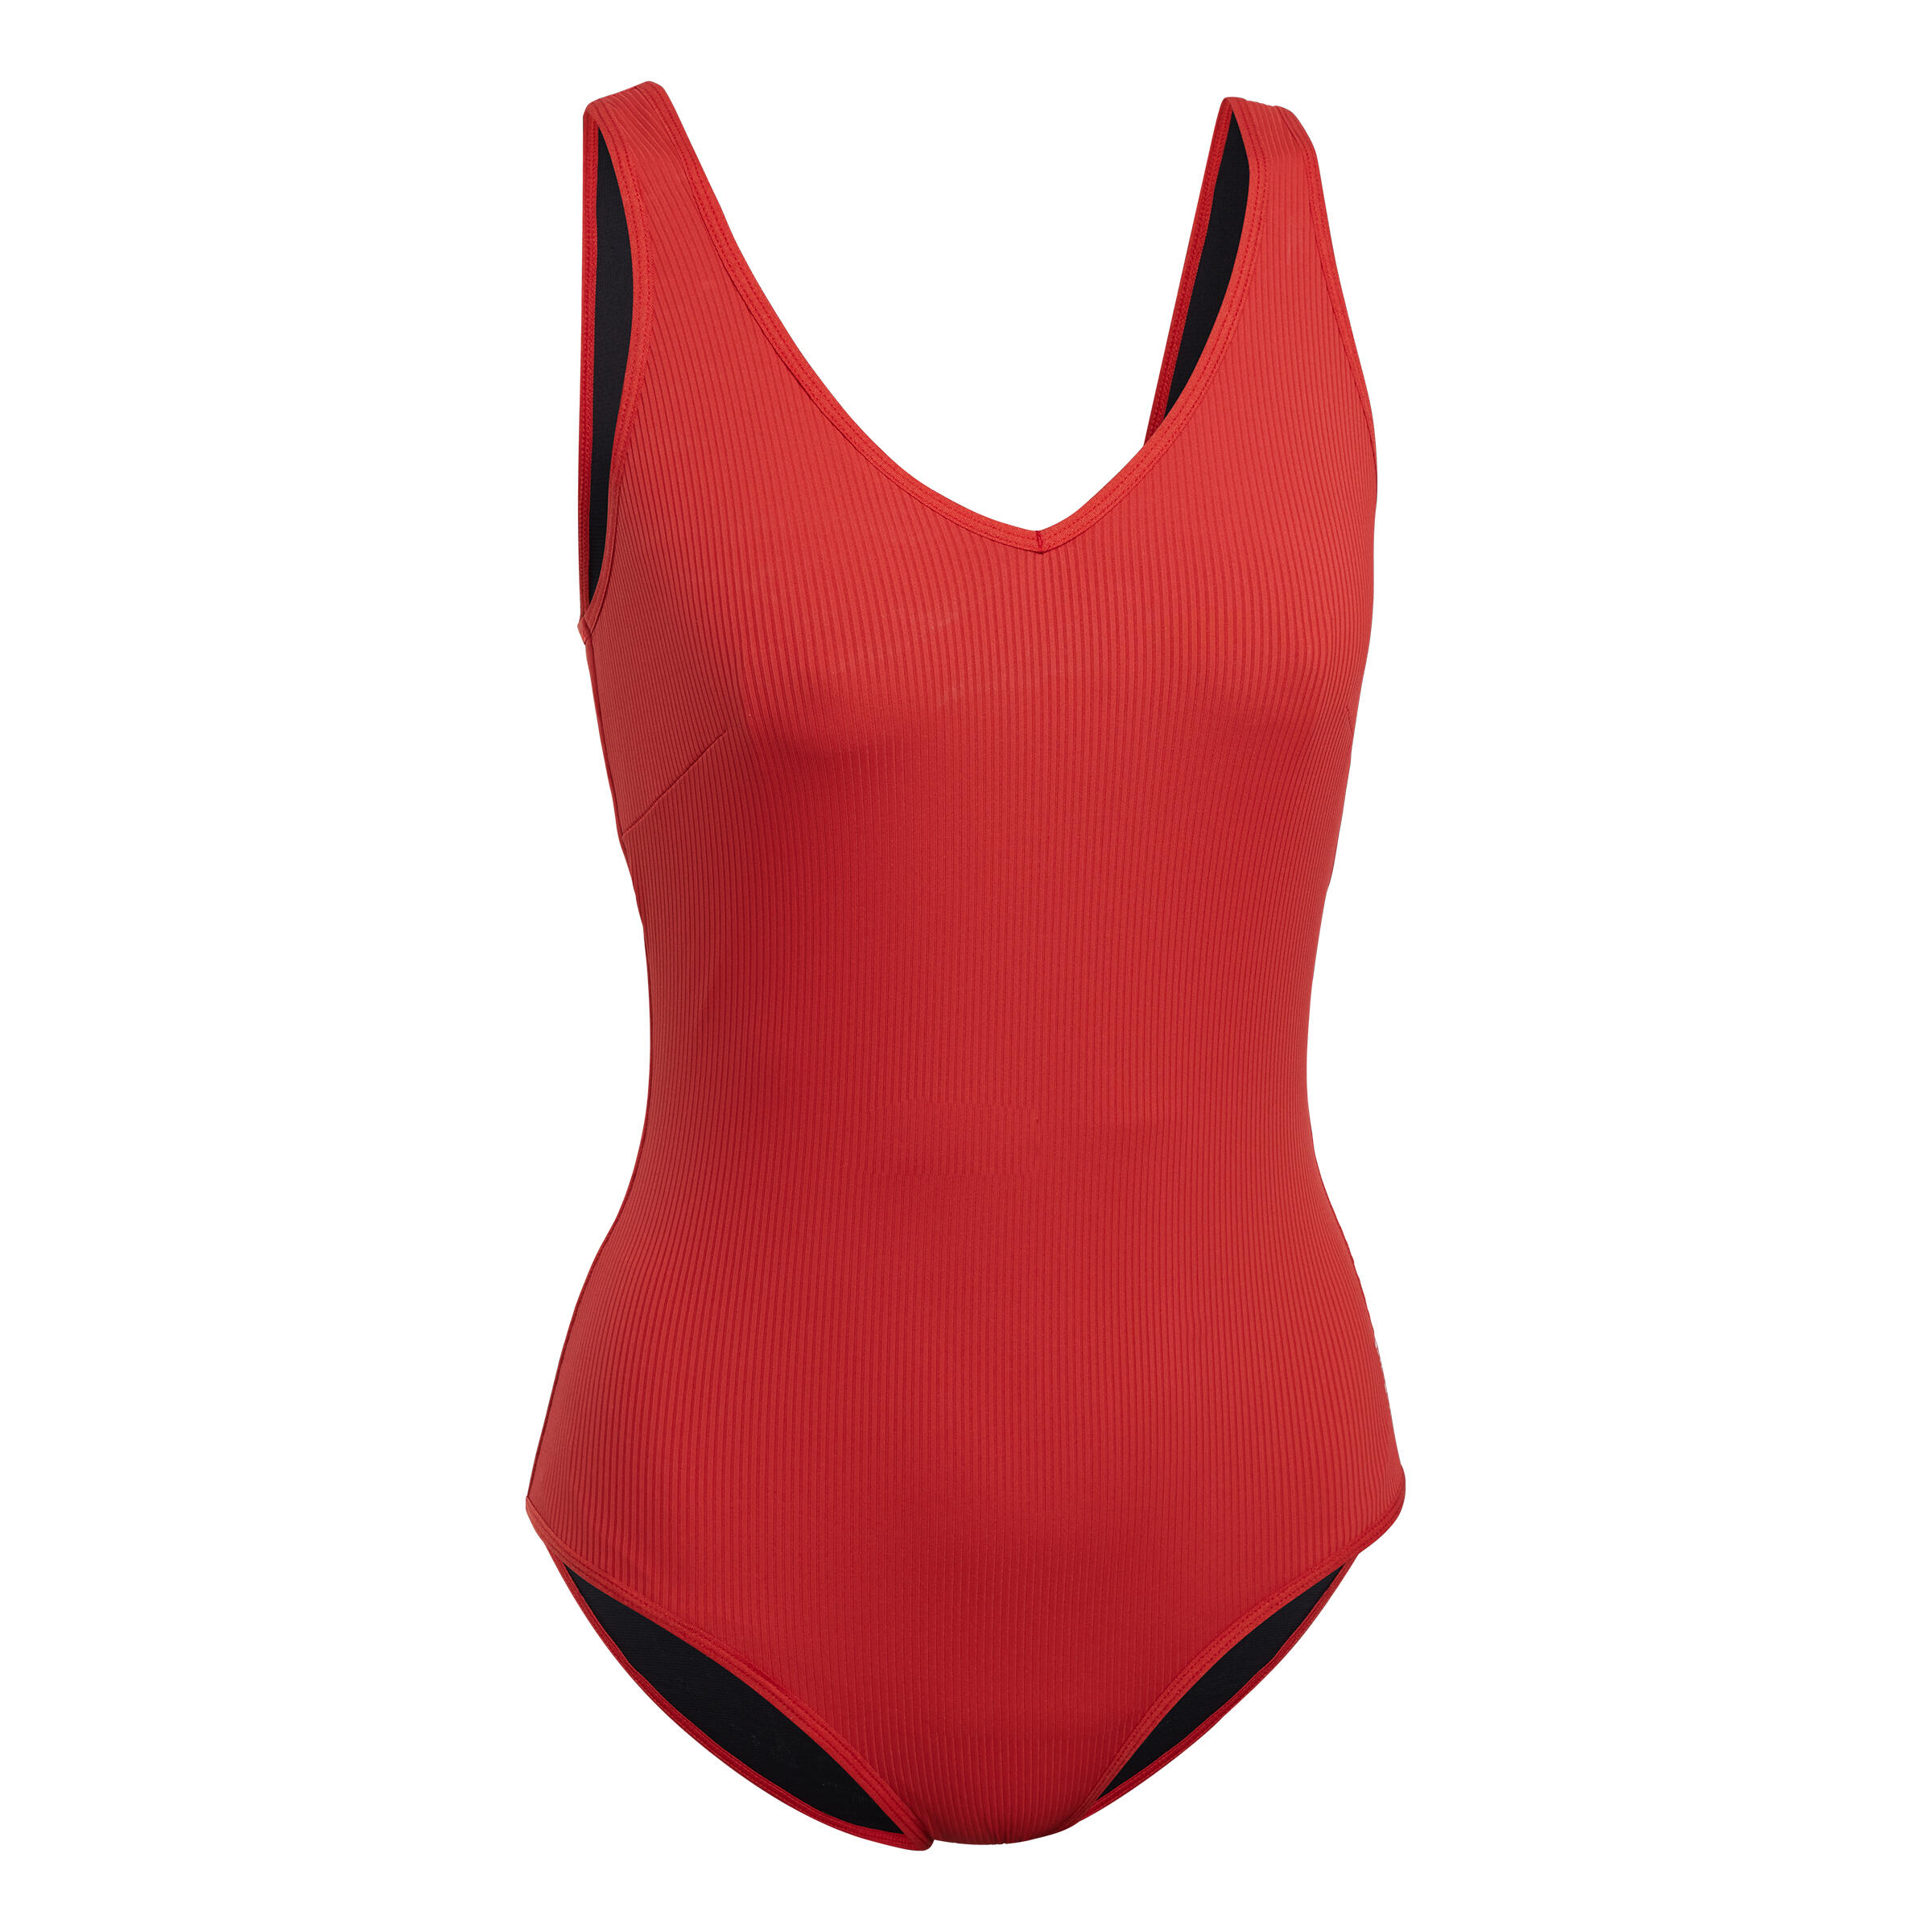 Women's Aquagym 1-piece Swimsuit Ines - Red 12/14